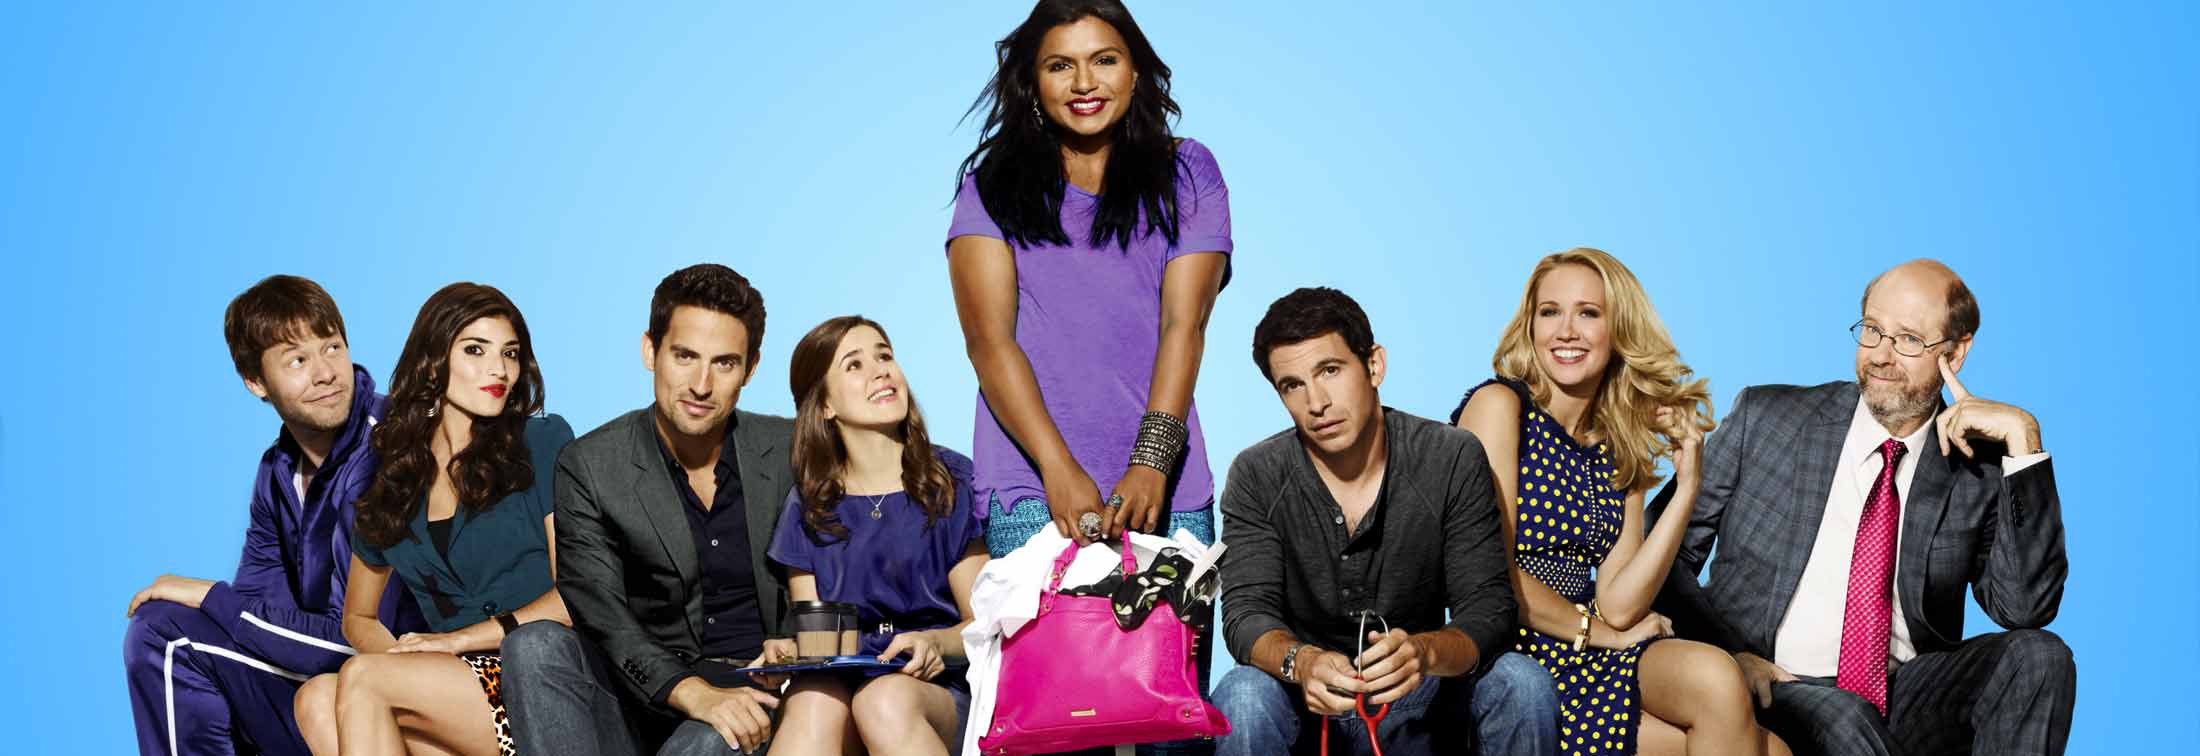 The Mindy Project: The Complete Series - The best prescription for happiness